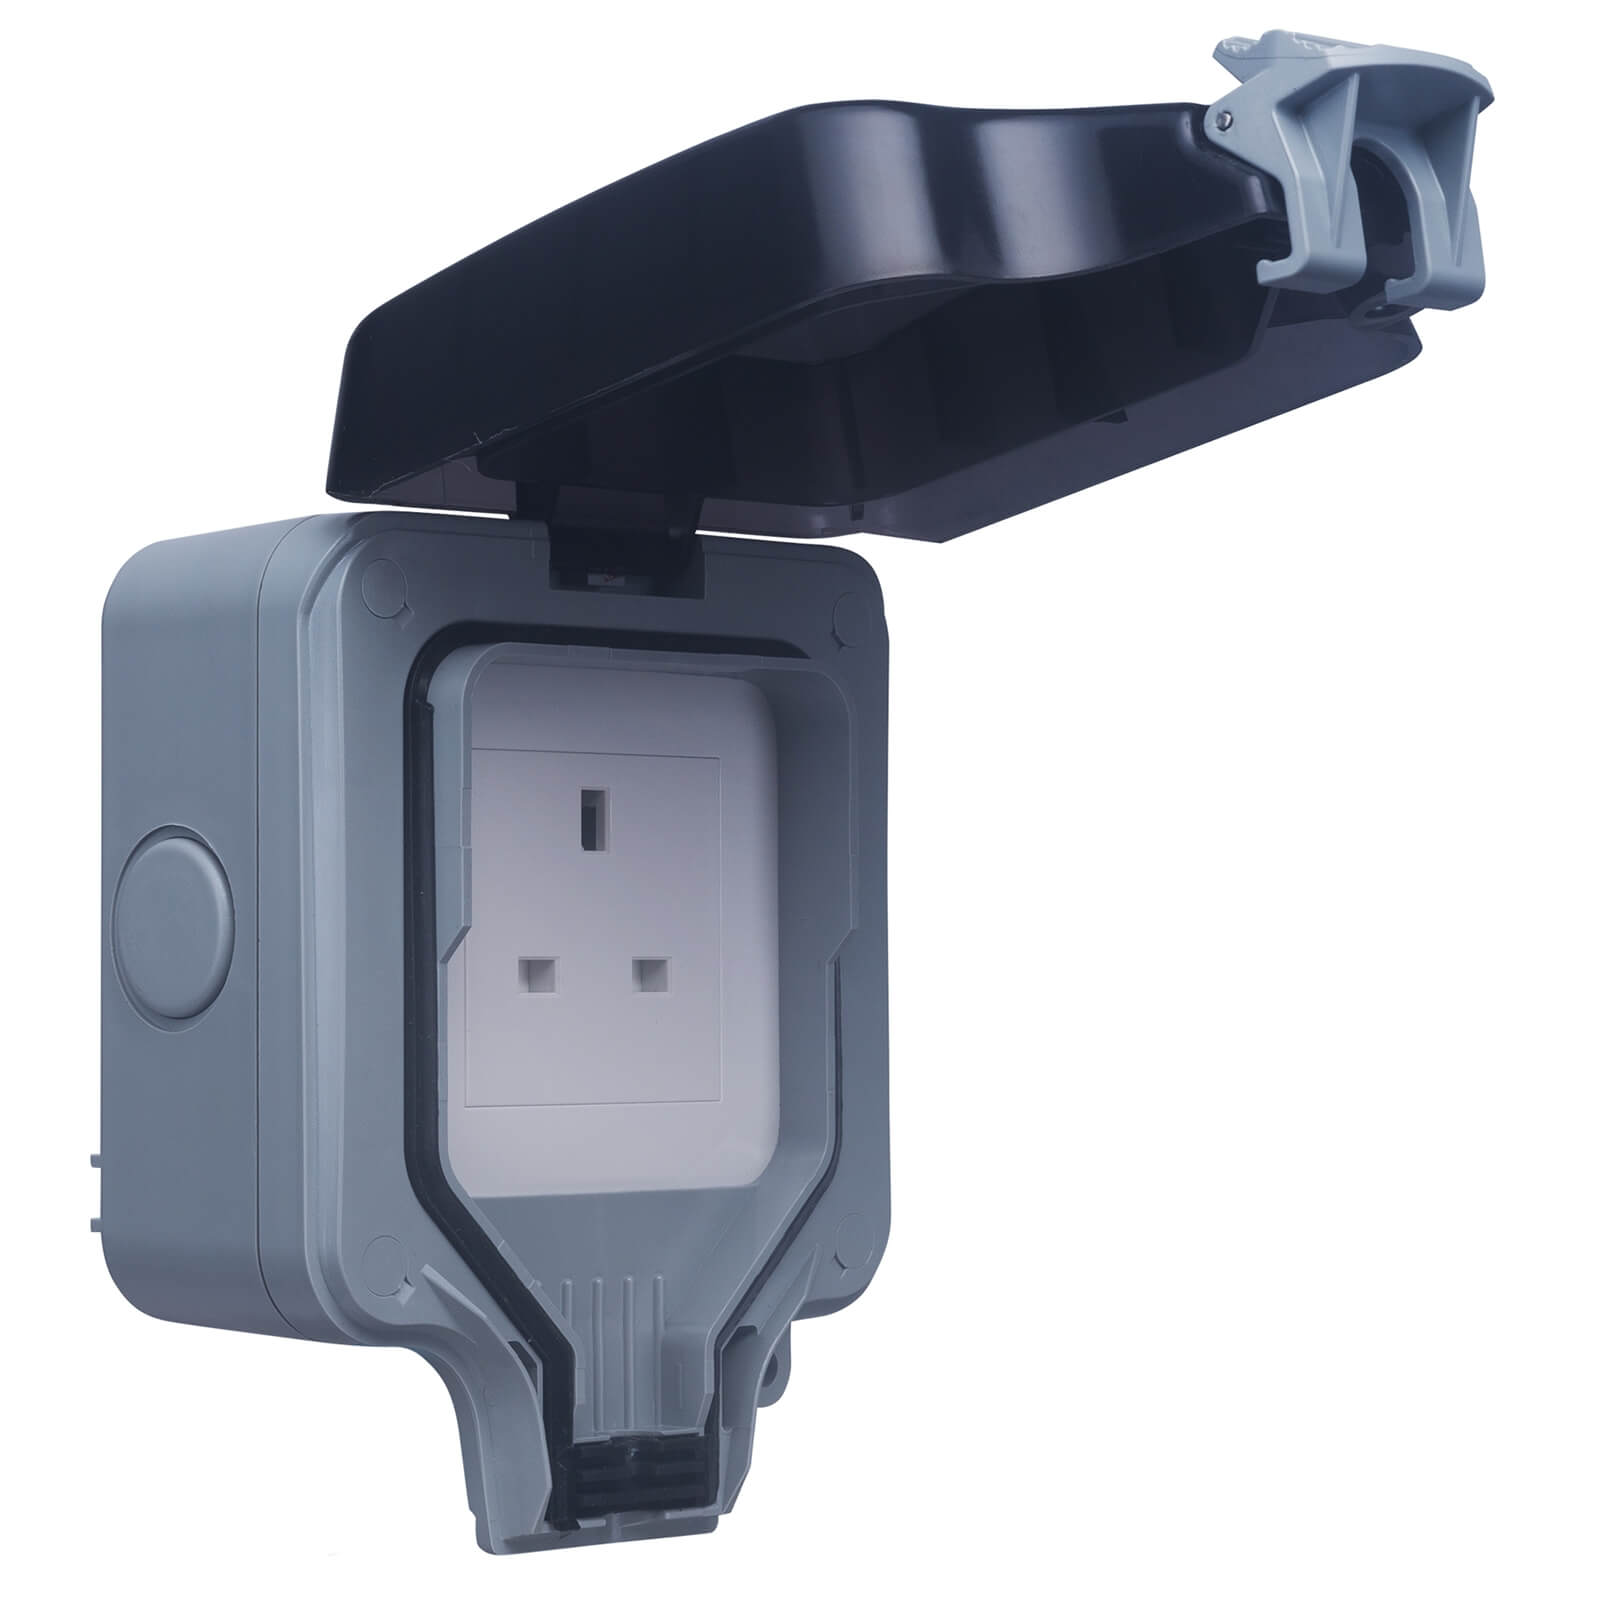 Photo of Bg 13 Amp 1 Gang Unswitched Weatherproof Socket Ip66 Rated Grey/black